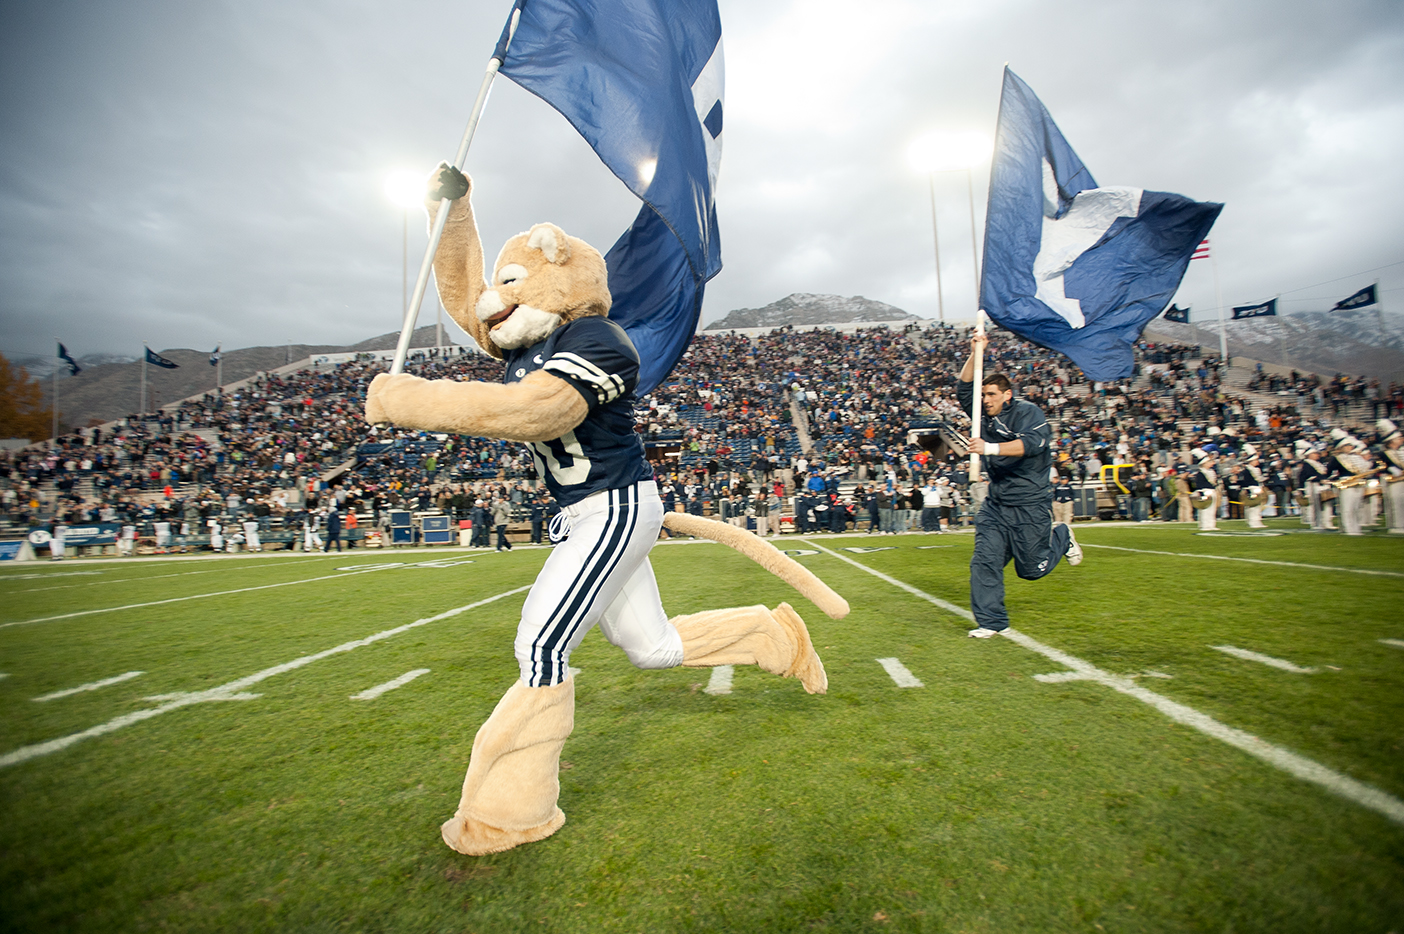 Cosmo carries one of the B-Y-U flags at a football game.